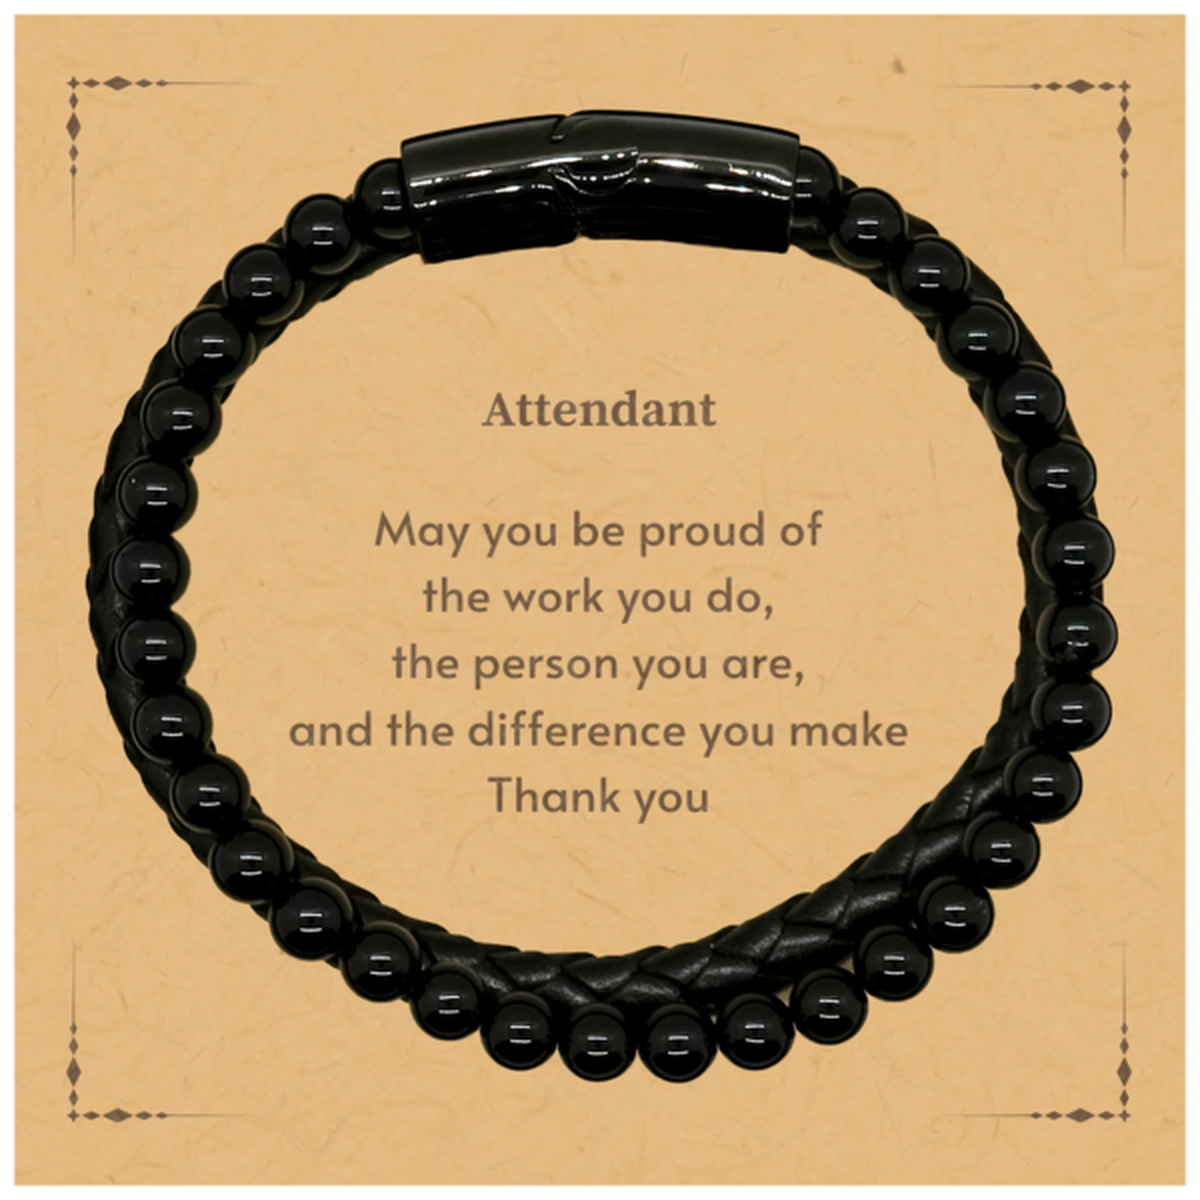 Heartwarming Stone Leather Bracelets Retirement Coworkers Gifts for Attendant, Attendant May You be proud of the work you do, the person you are Gifts for Boss Men Women Friends